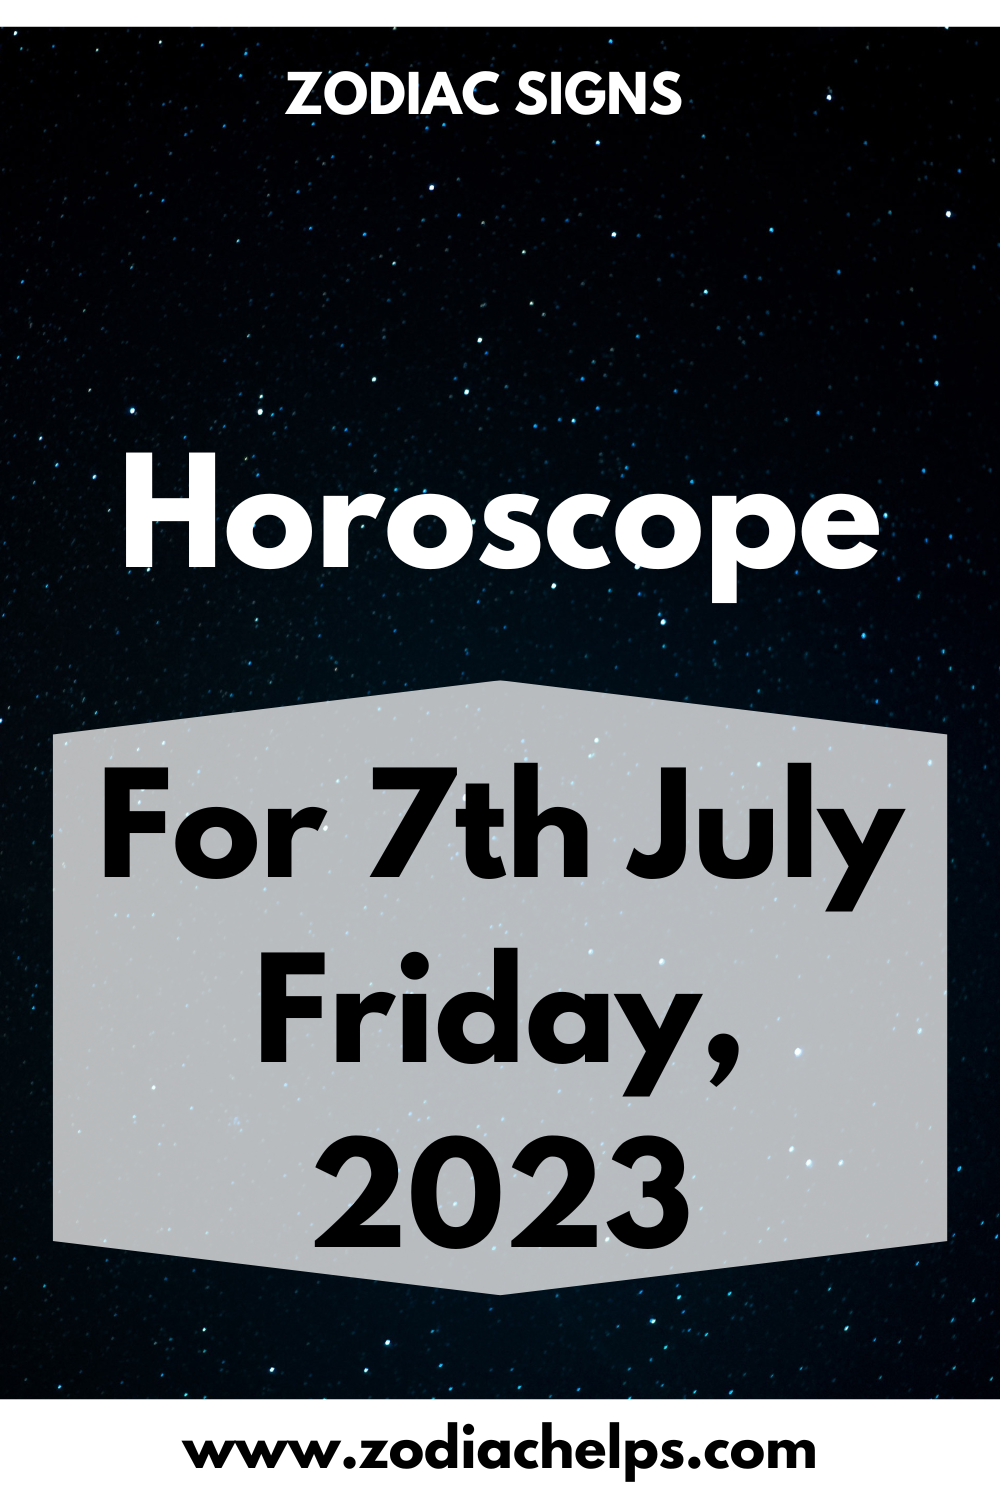 Horoscope for 7th July Friday, 2023